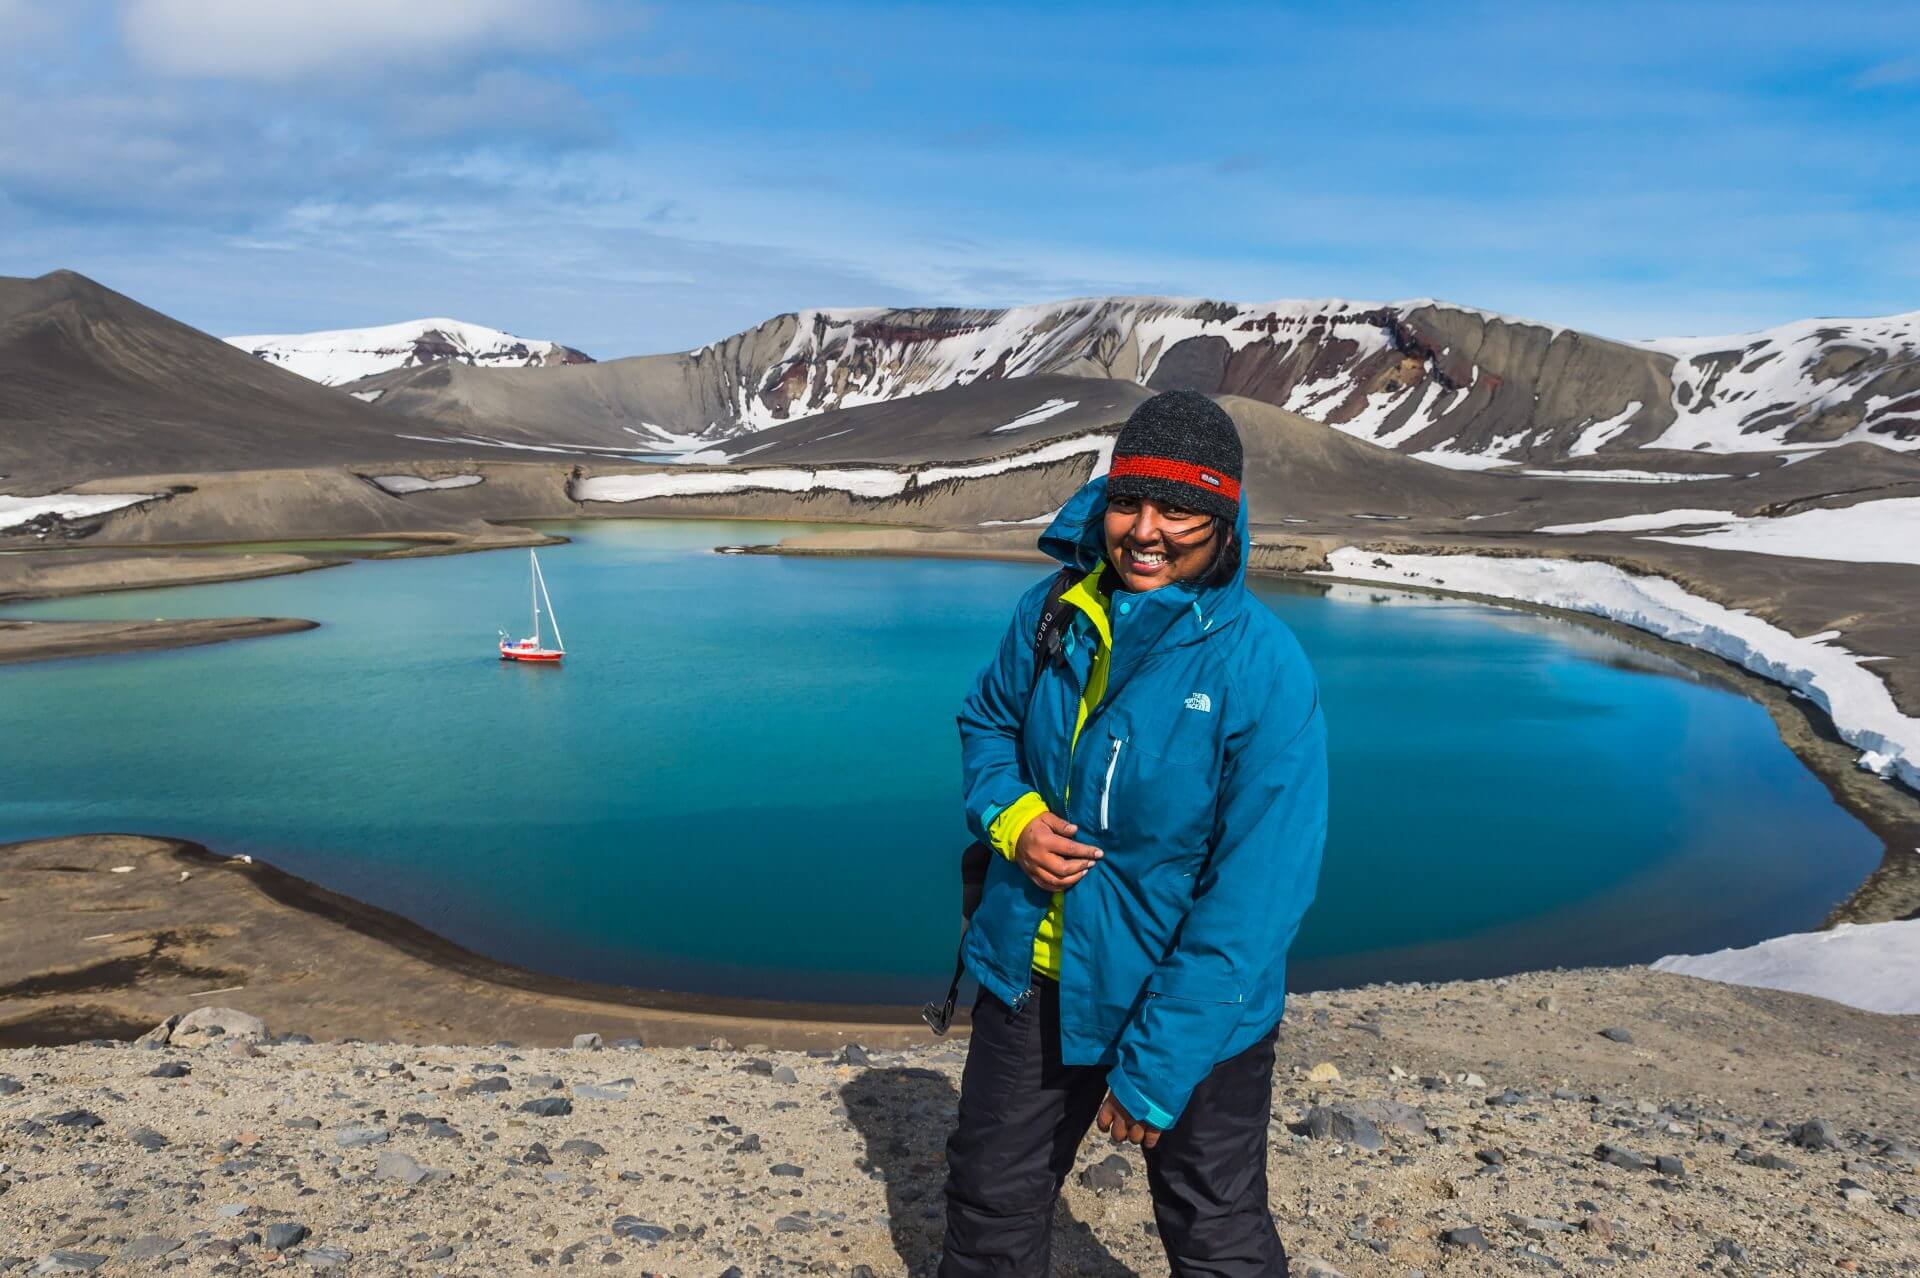 Sivani in the South Shetland Islands in 2014. In the background, the S/Y Sarah W. Vorwerk waits.